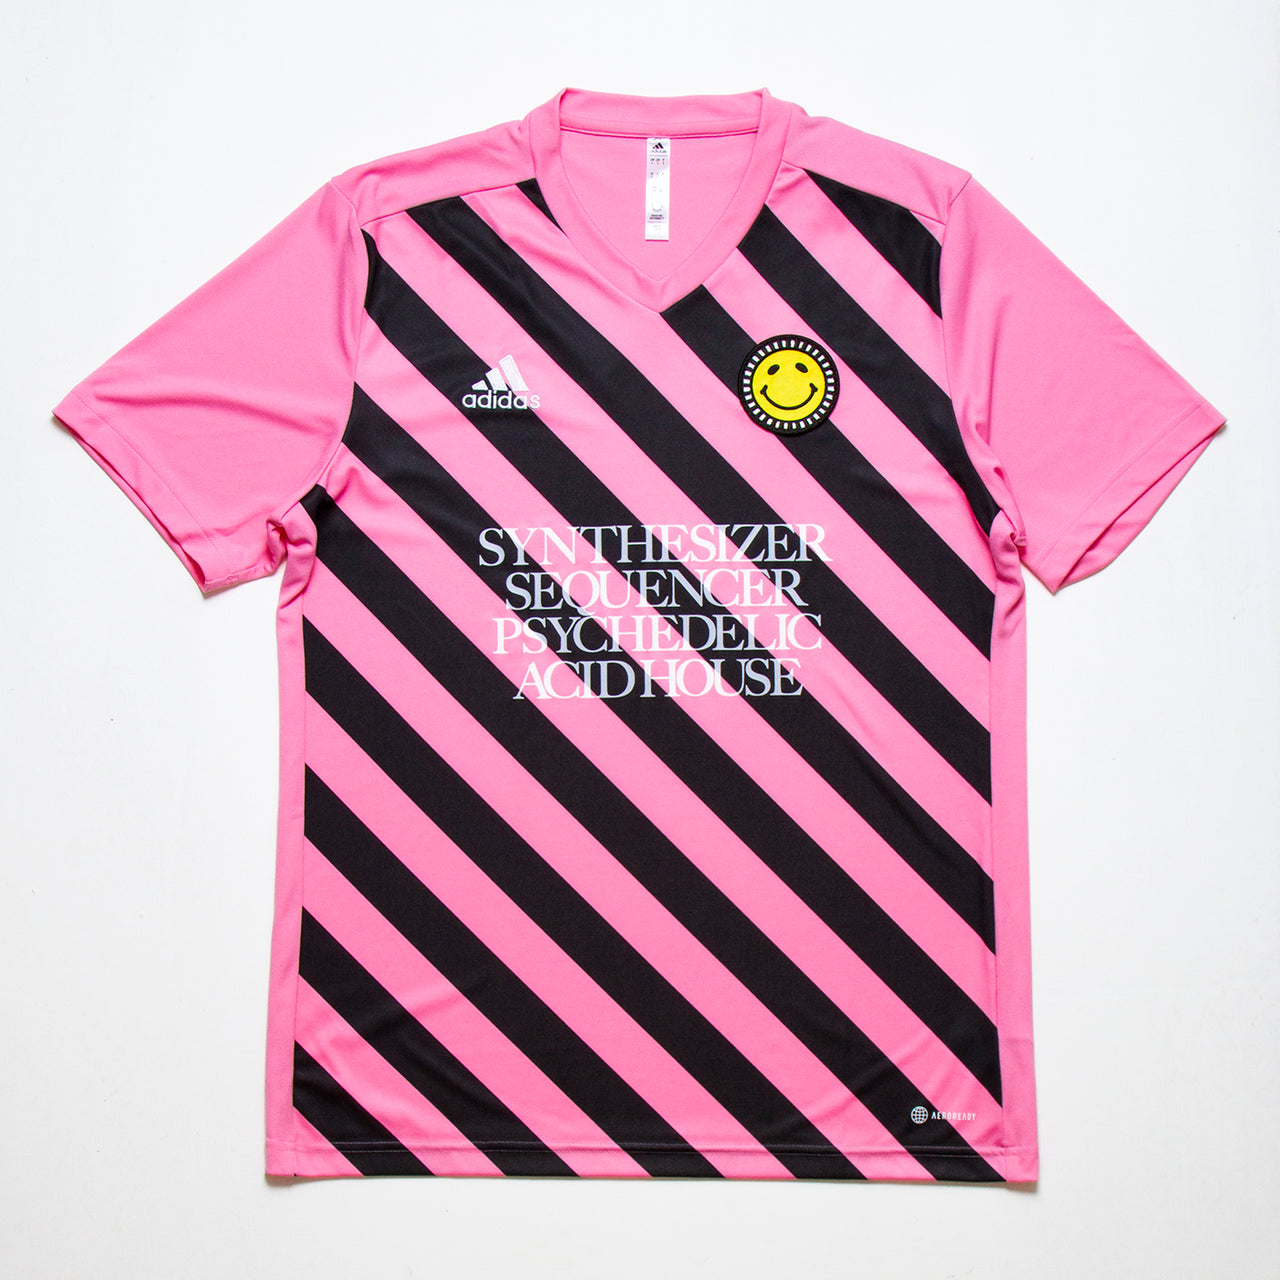 Wasted Heroes FC Entrada 22 - Training Jersey - Striped Pink Glow